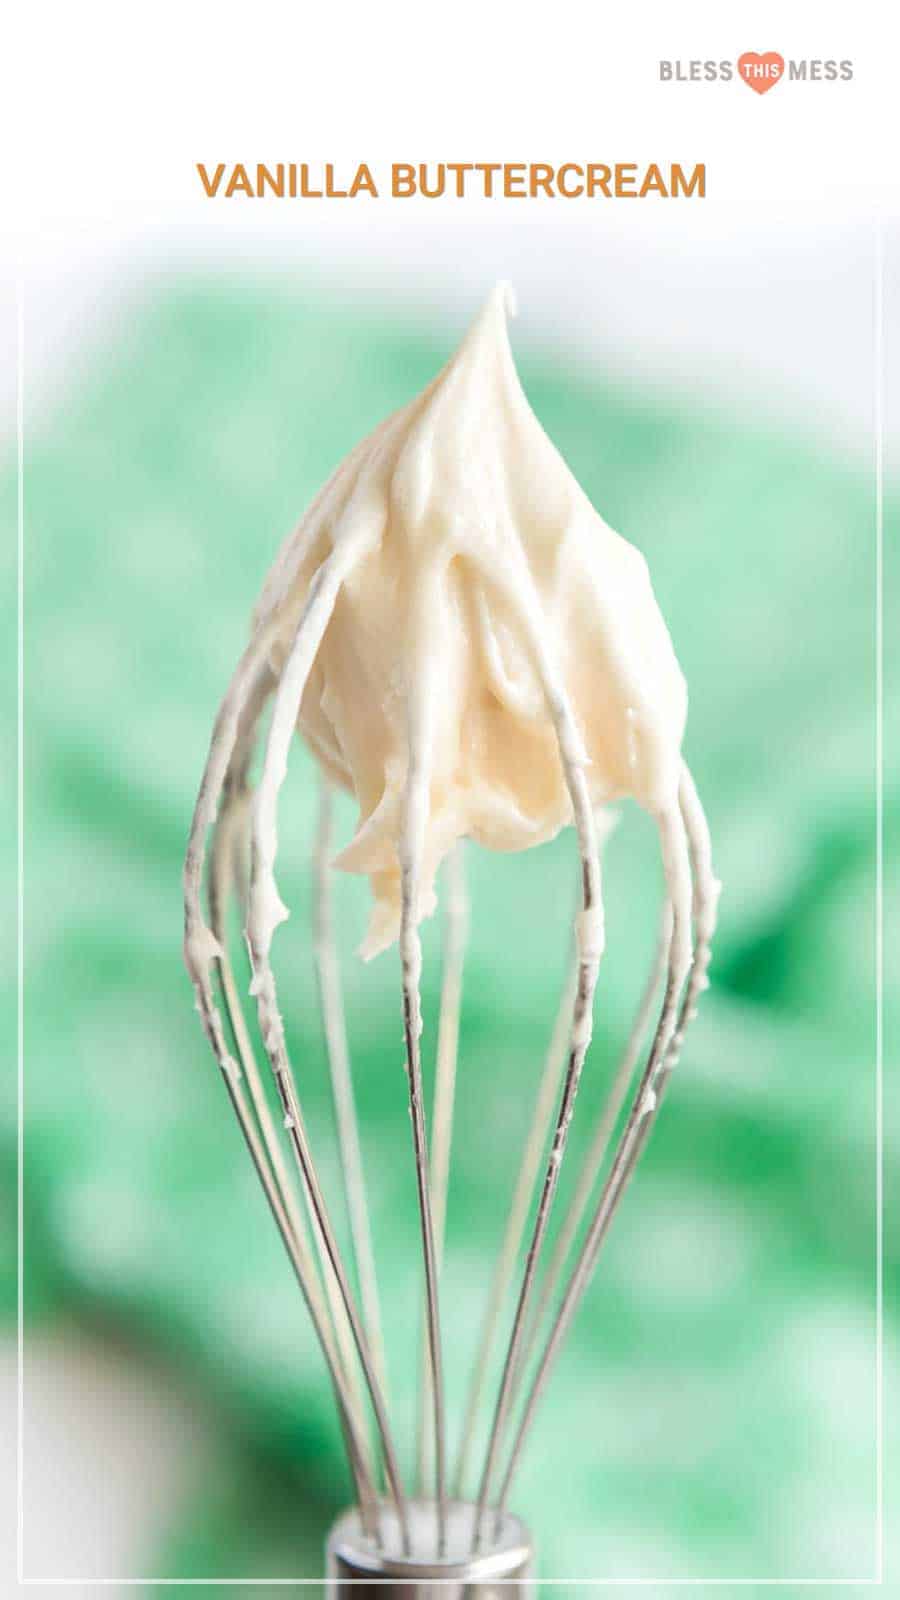 Light and fluffy vanilla buttercream frosting is sweet and irresistible with a rich, buttery undertone that'll make you want to eat a bowl of it plain with just a spoon! And it comes together quickly and easily with the use of your stand or electric mixer. You won't ever want to buy frosting from the store again. #buttercreamfrosting #vanillabuttercreamfrosting #vanillafrosting #frosting #frostingrecipe #easyfrosting #homemadefrosting #vanillaicing